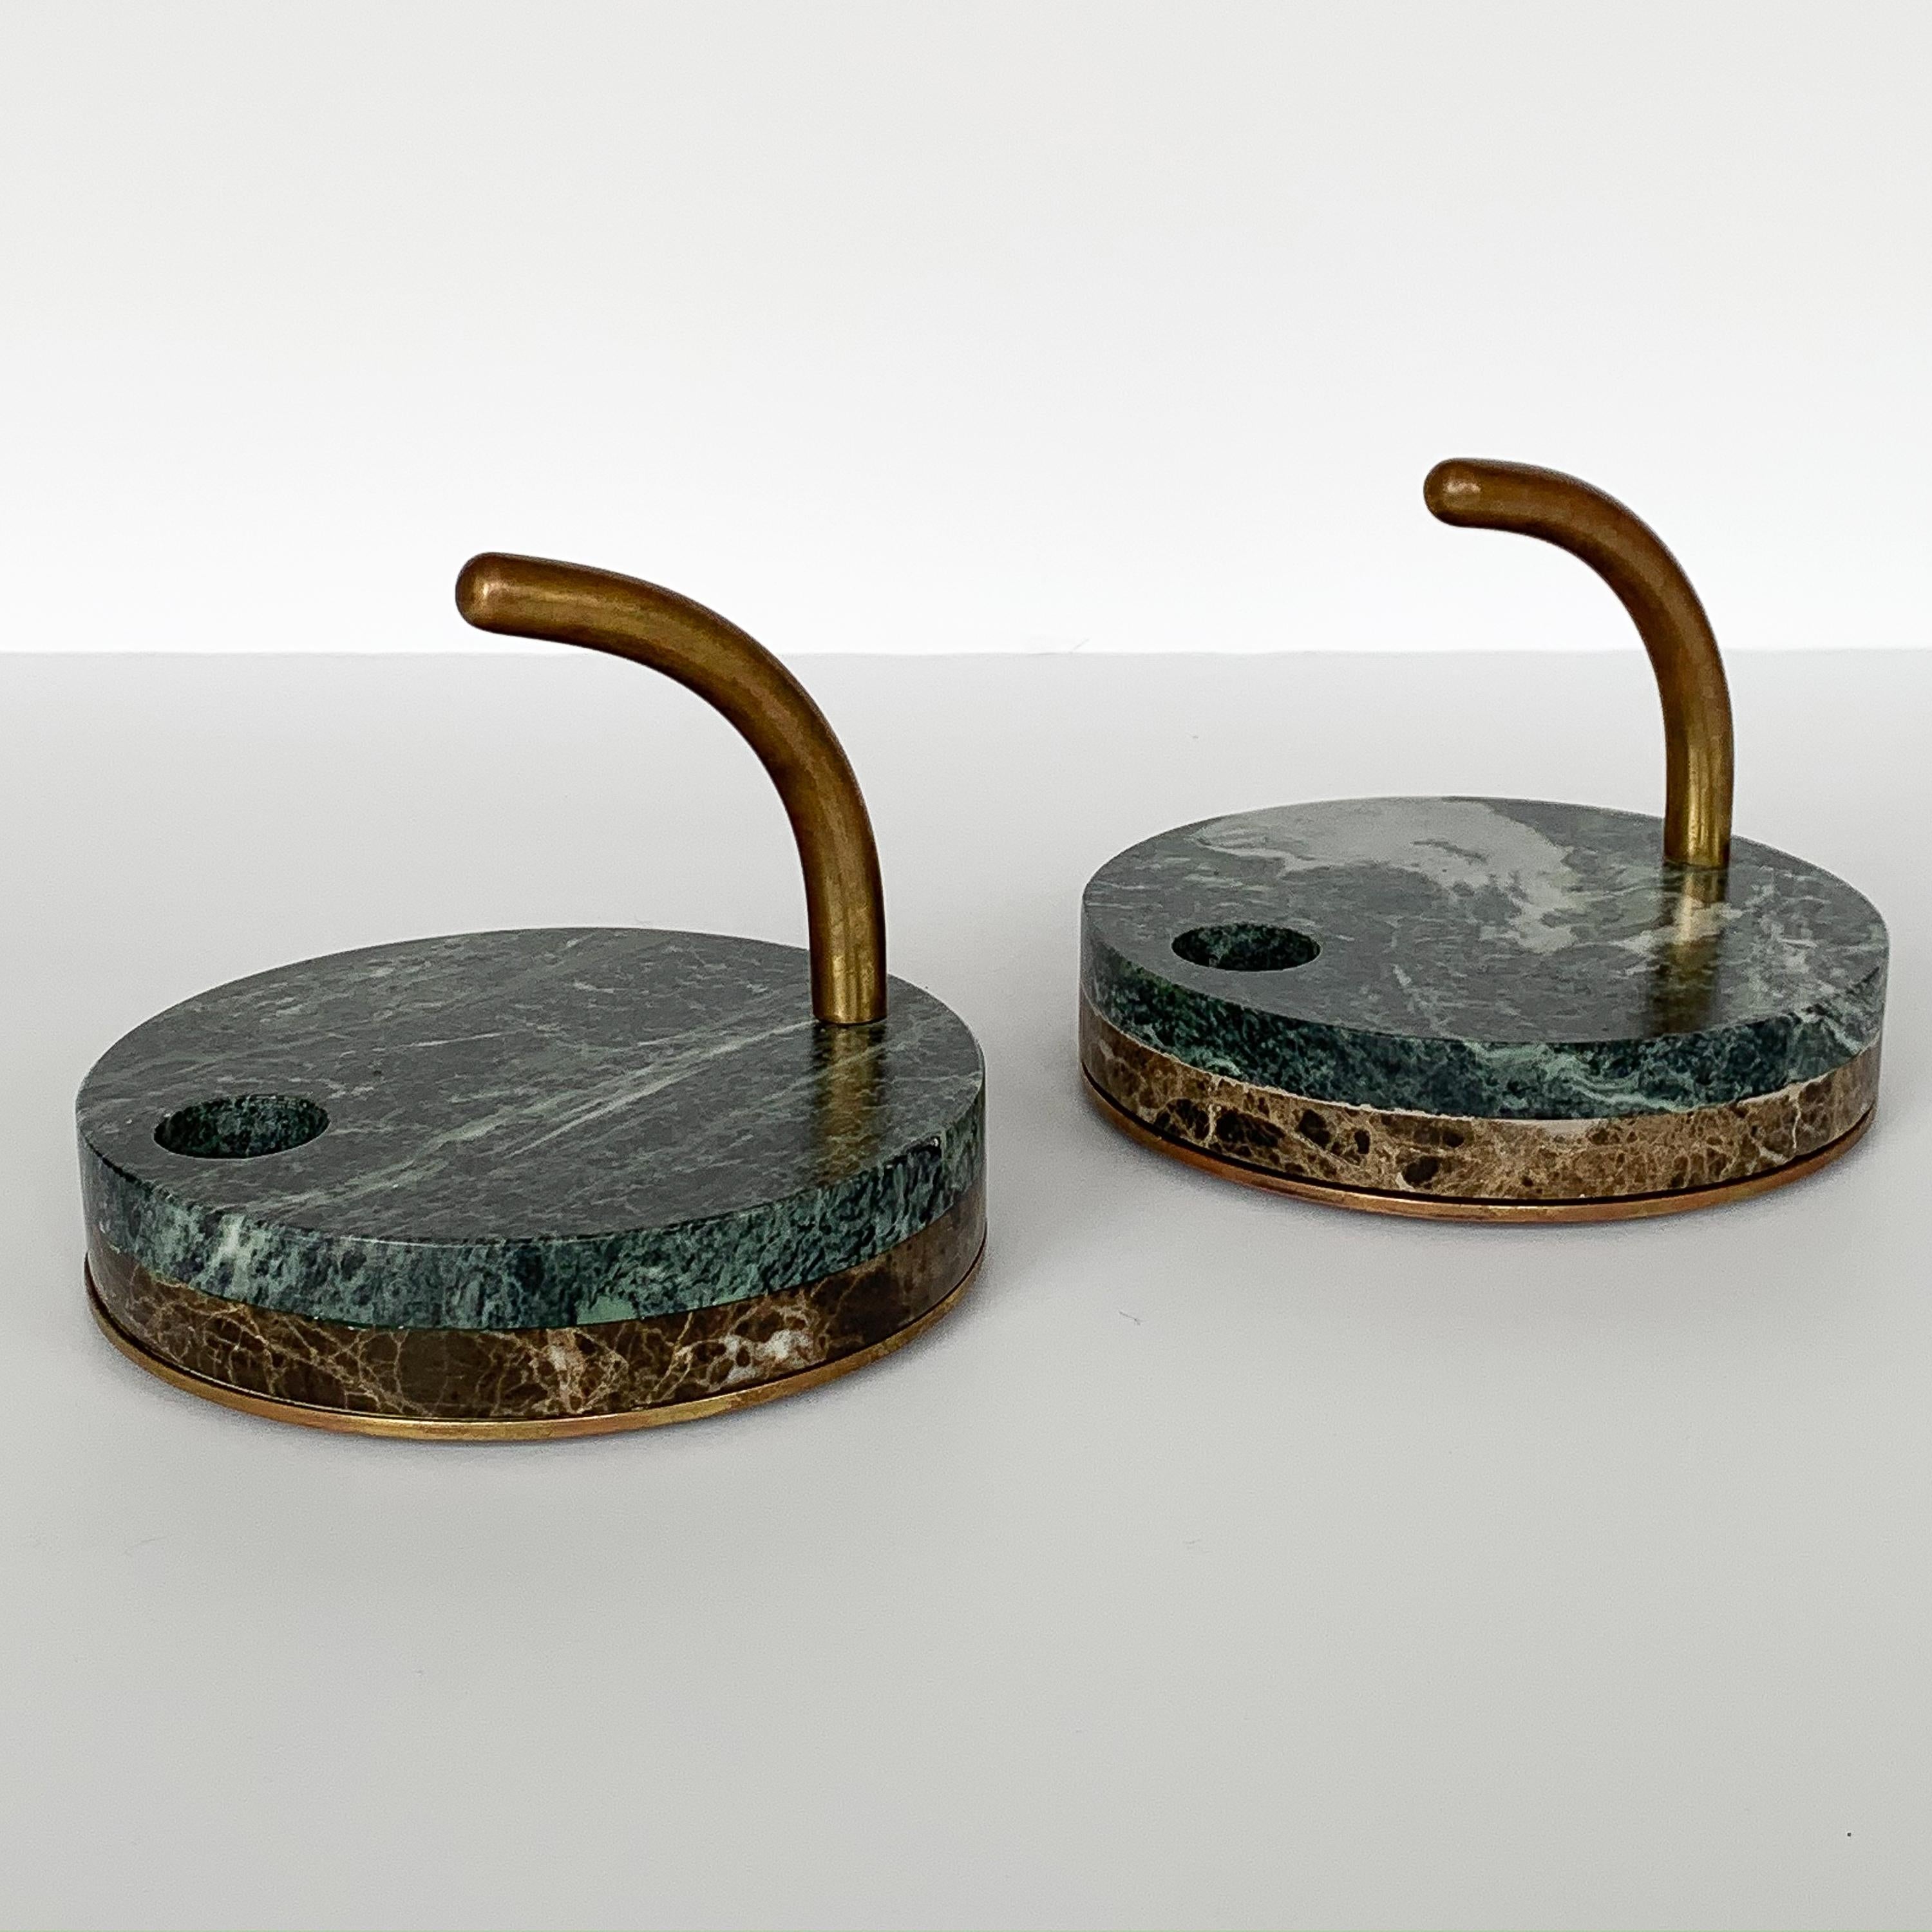 Pair of Italian modernist marble and bronze candleholders, circa 1980s. Bronze bases with layered brown and green marble. Bronze arched handle. Hole fits two different sized candles, a standard 3/4